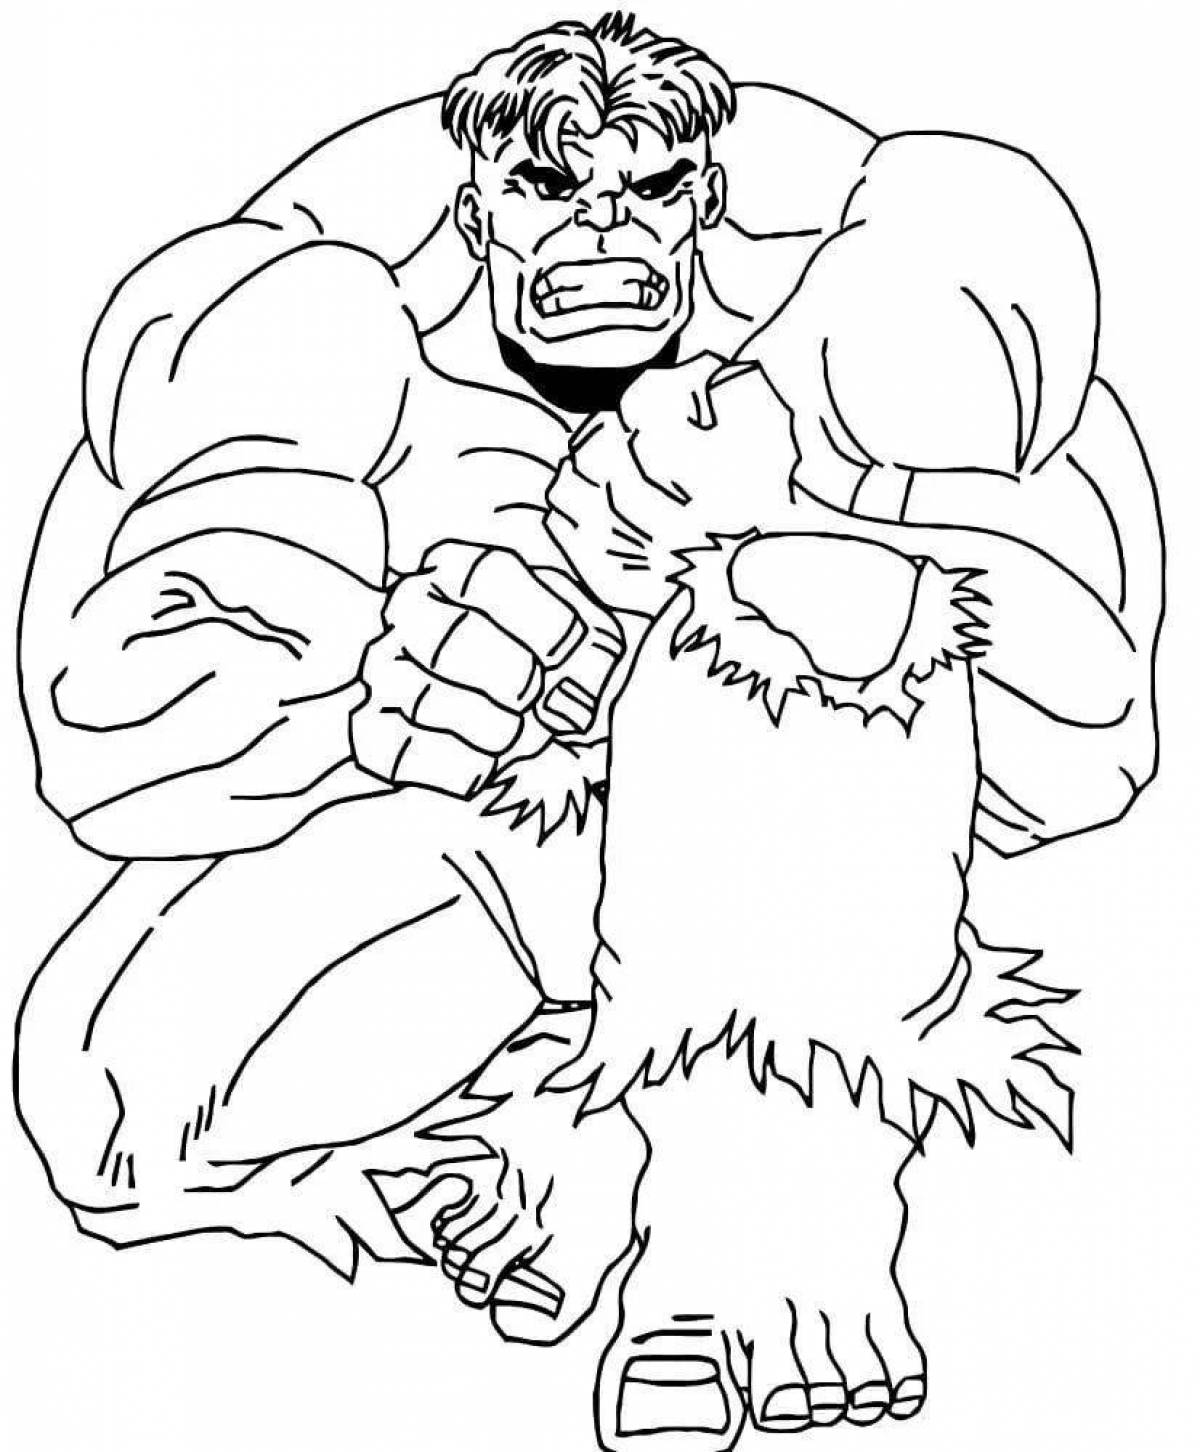 Wonderful Hulk coloring book for children 5-6 years old